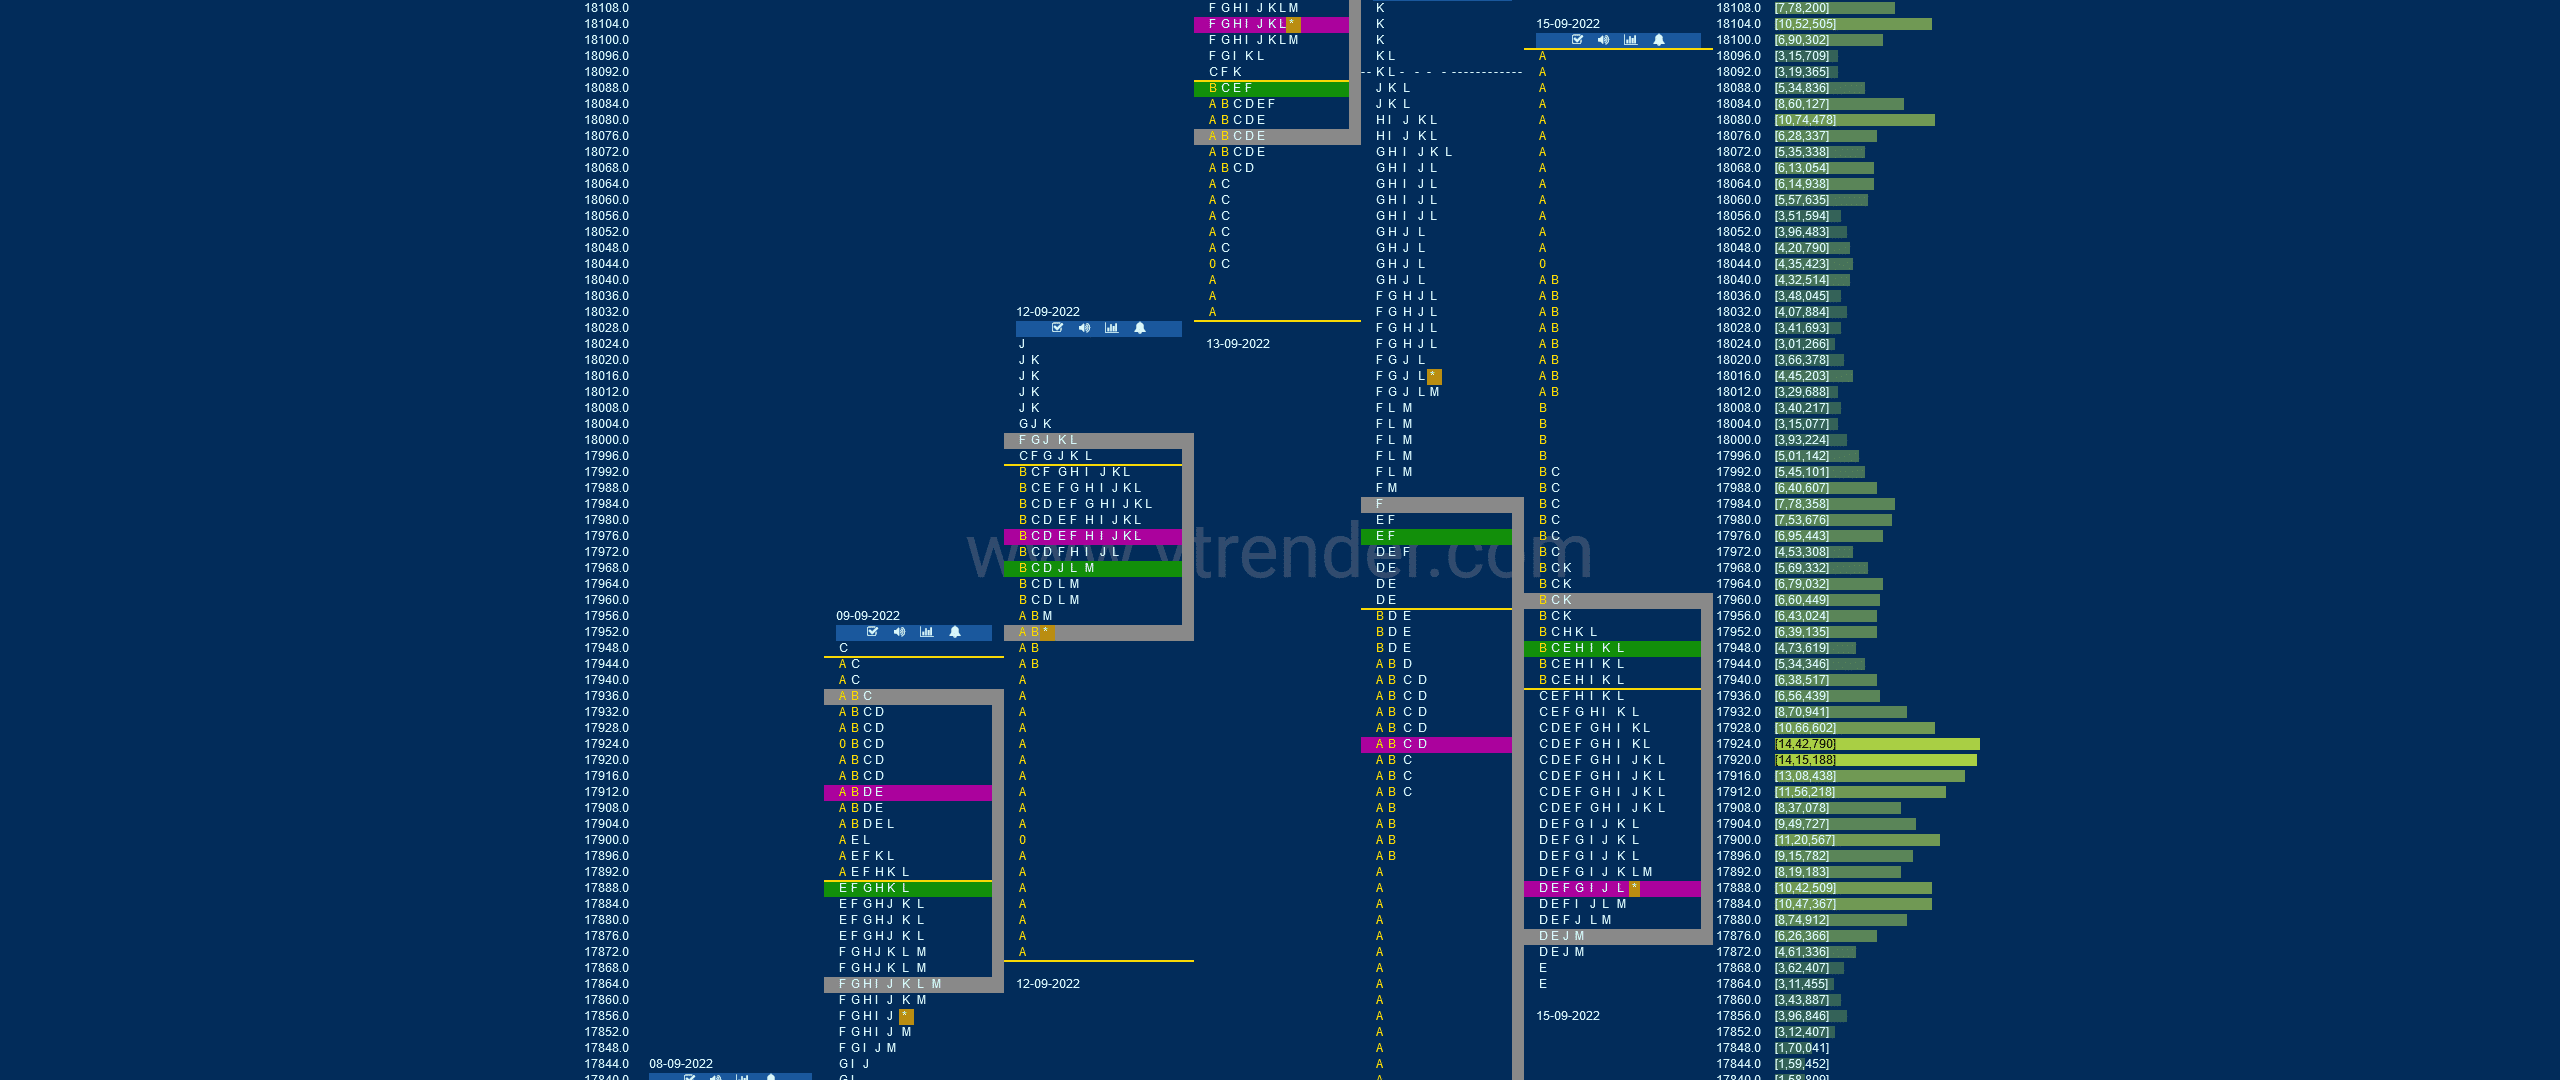 Nf 10 Market Profile Analysis Dated 15Th Sep 2022 Banknifty Futures, Charts, Day Trading, Intraday Trading, Intraday Trading Strategies, Market Profile, Market Profile Trading Strategies, Nifty Futures, Order Flow Analysis, Support And Resistance, Technical Analysis, Trading Strategies, Volume Profile Trading